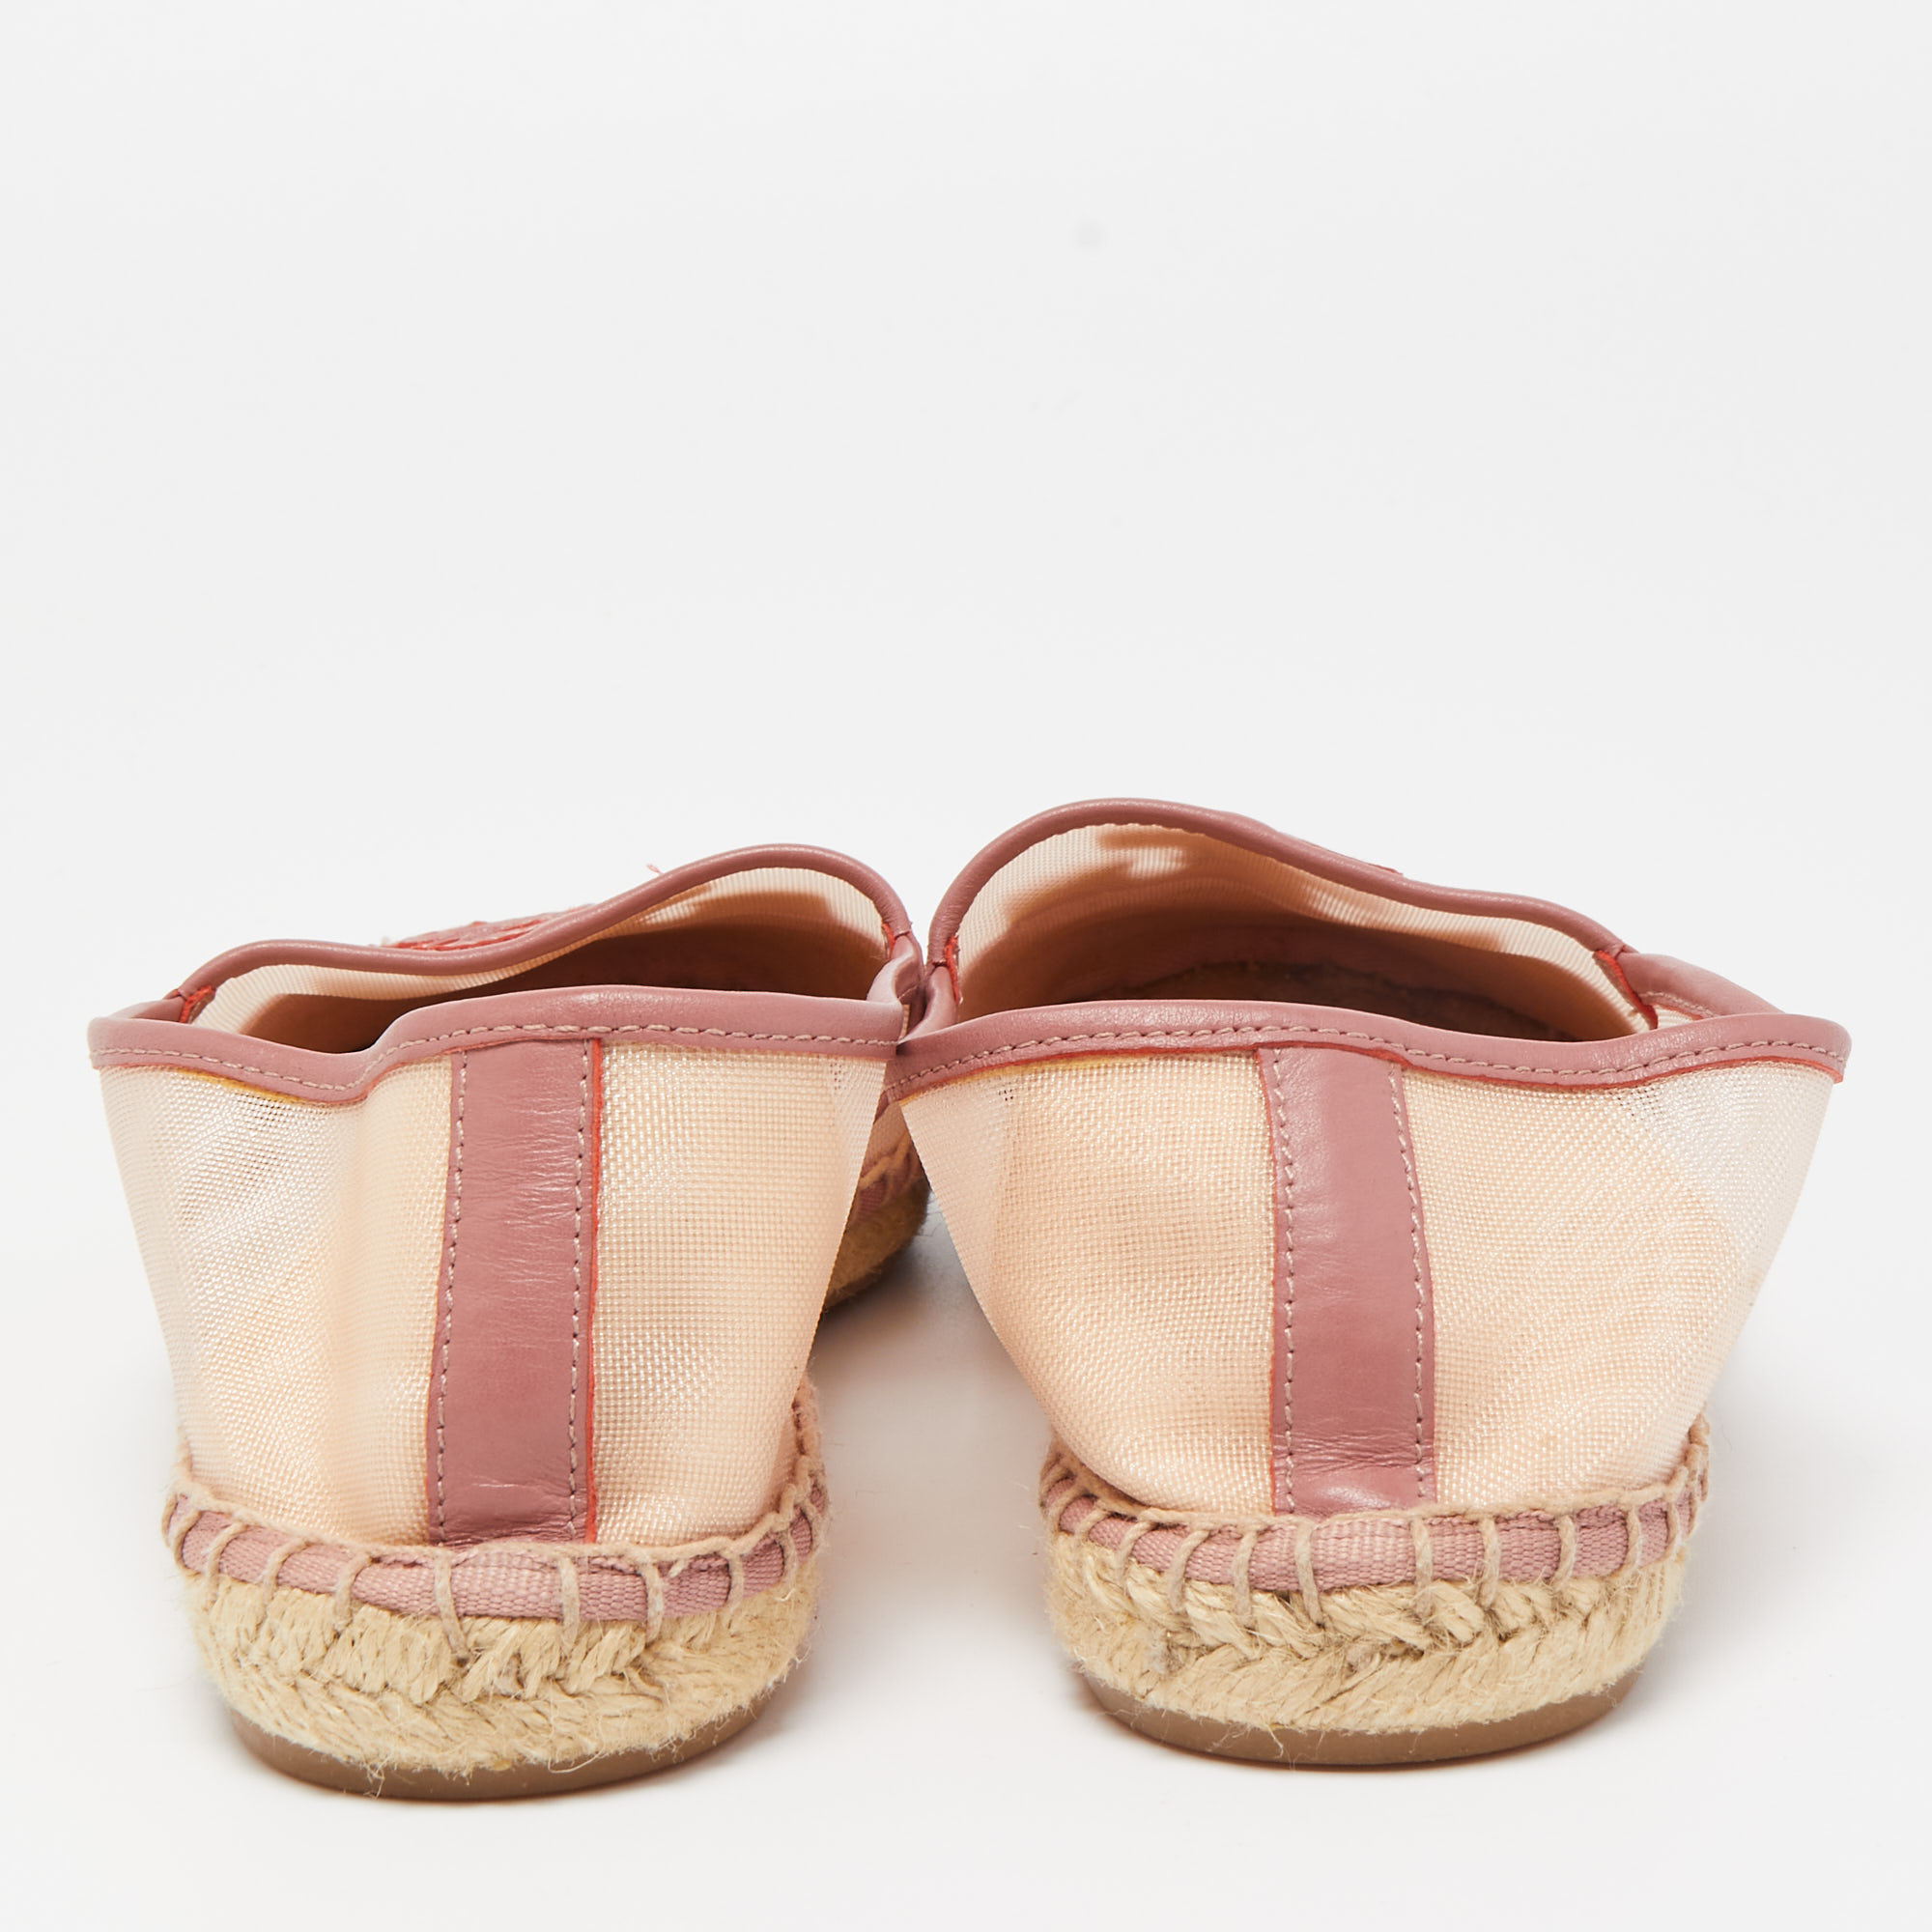 Tory Burch Pink Mesh And Leather Espadrilles Flats Size 37.5